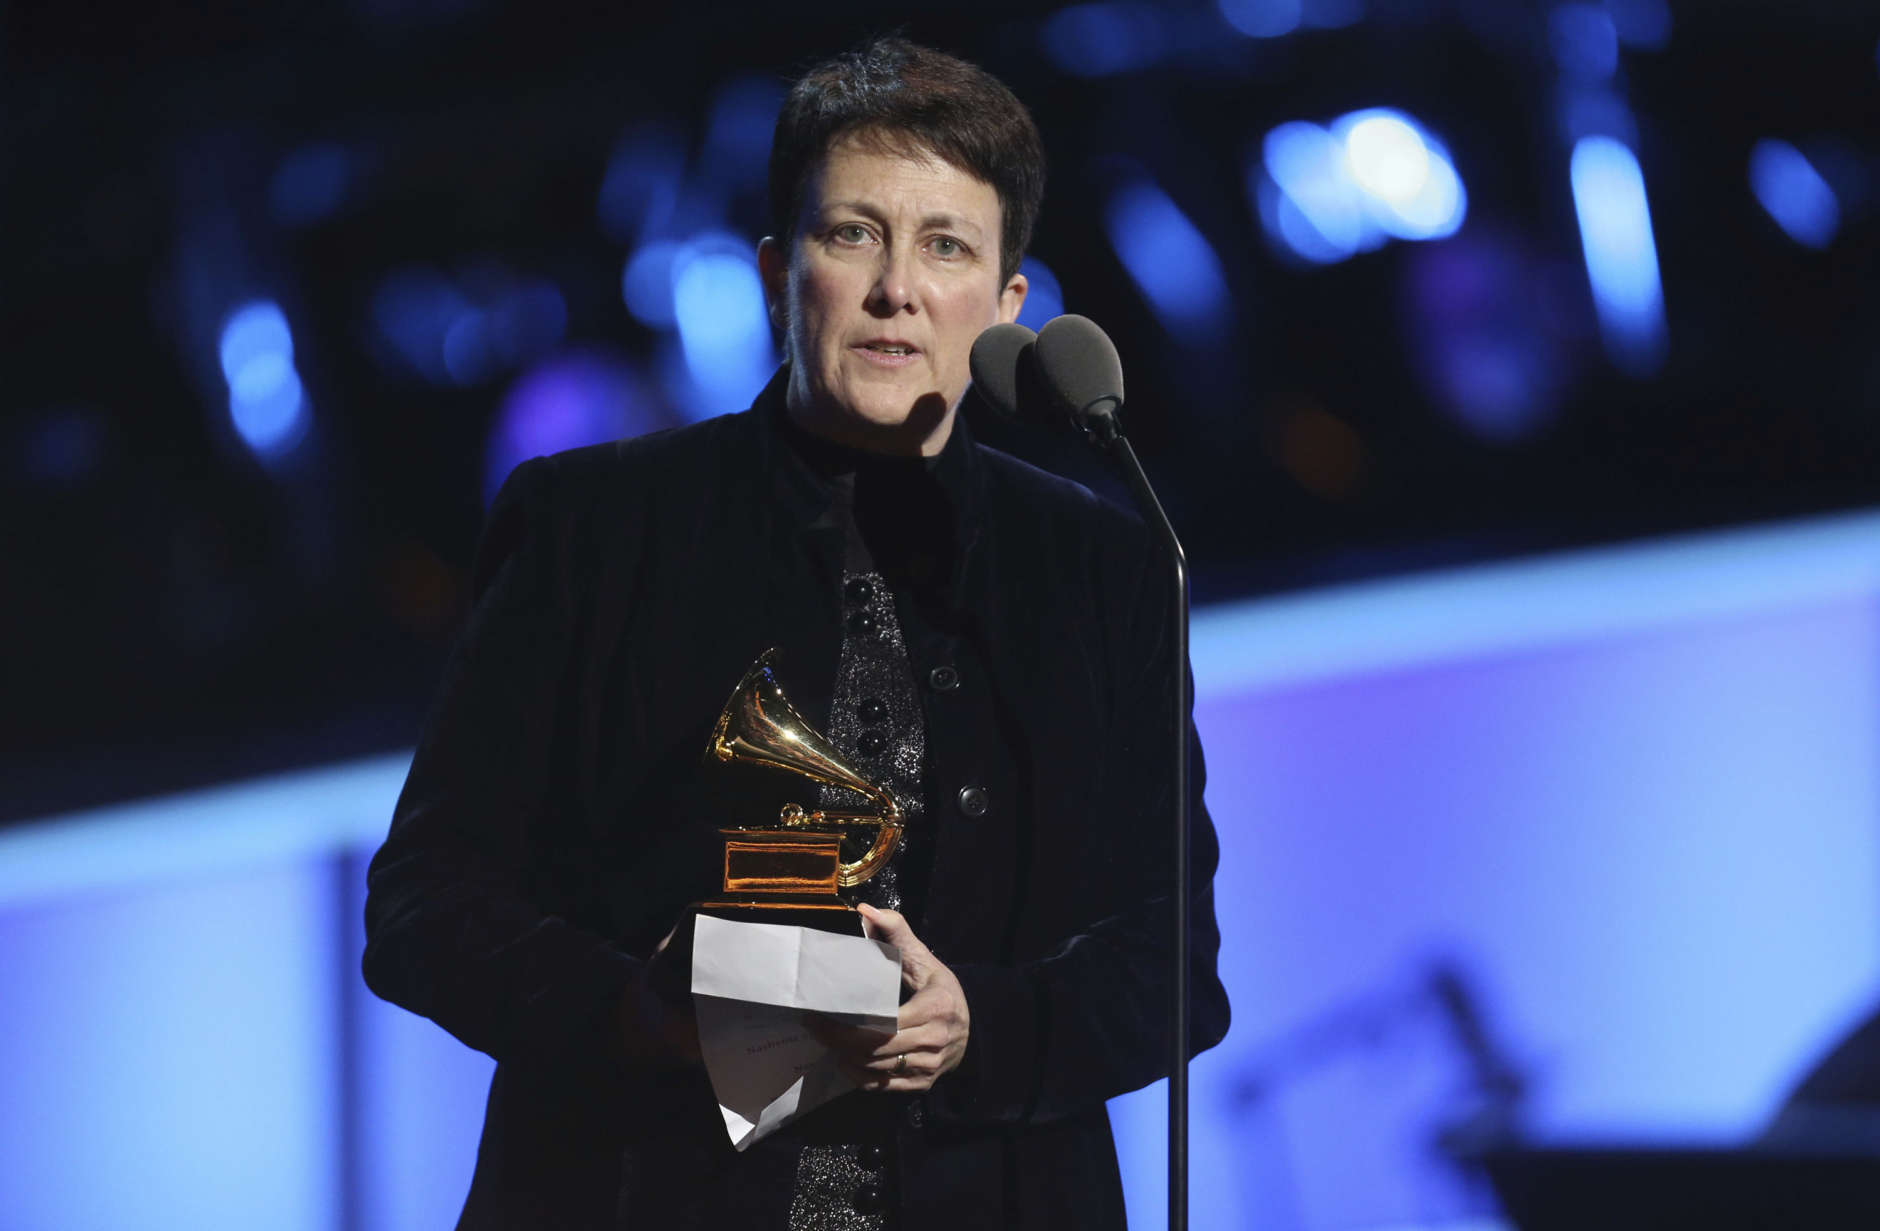 Jennifer Higdon accepts the best contemporary classical composition award for "Viola Concerto" at the 60th annual Grammy Awards at Madison Square Garden on Sunday, Jan. 28, 2018, in New York. (Photo by Matt Sayles/Invision/AP)